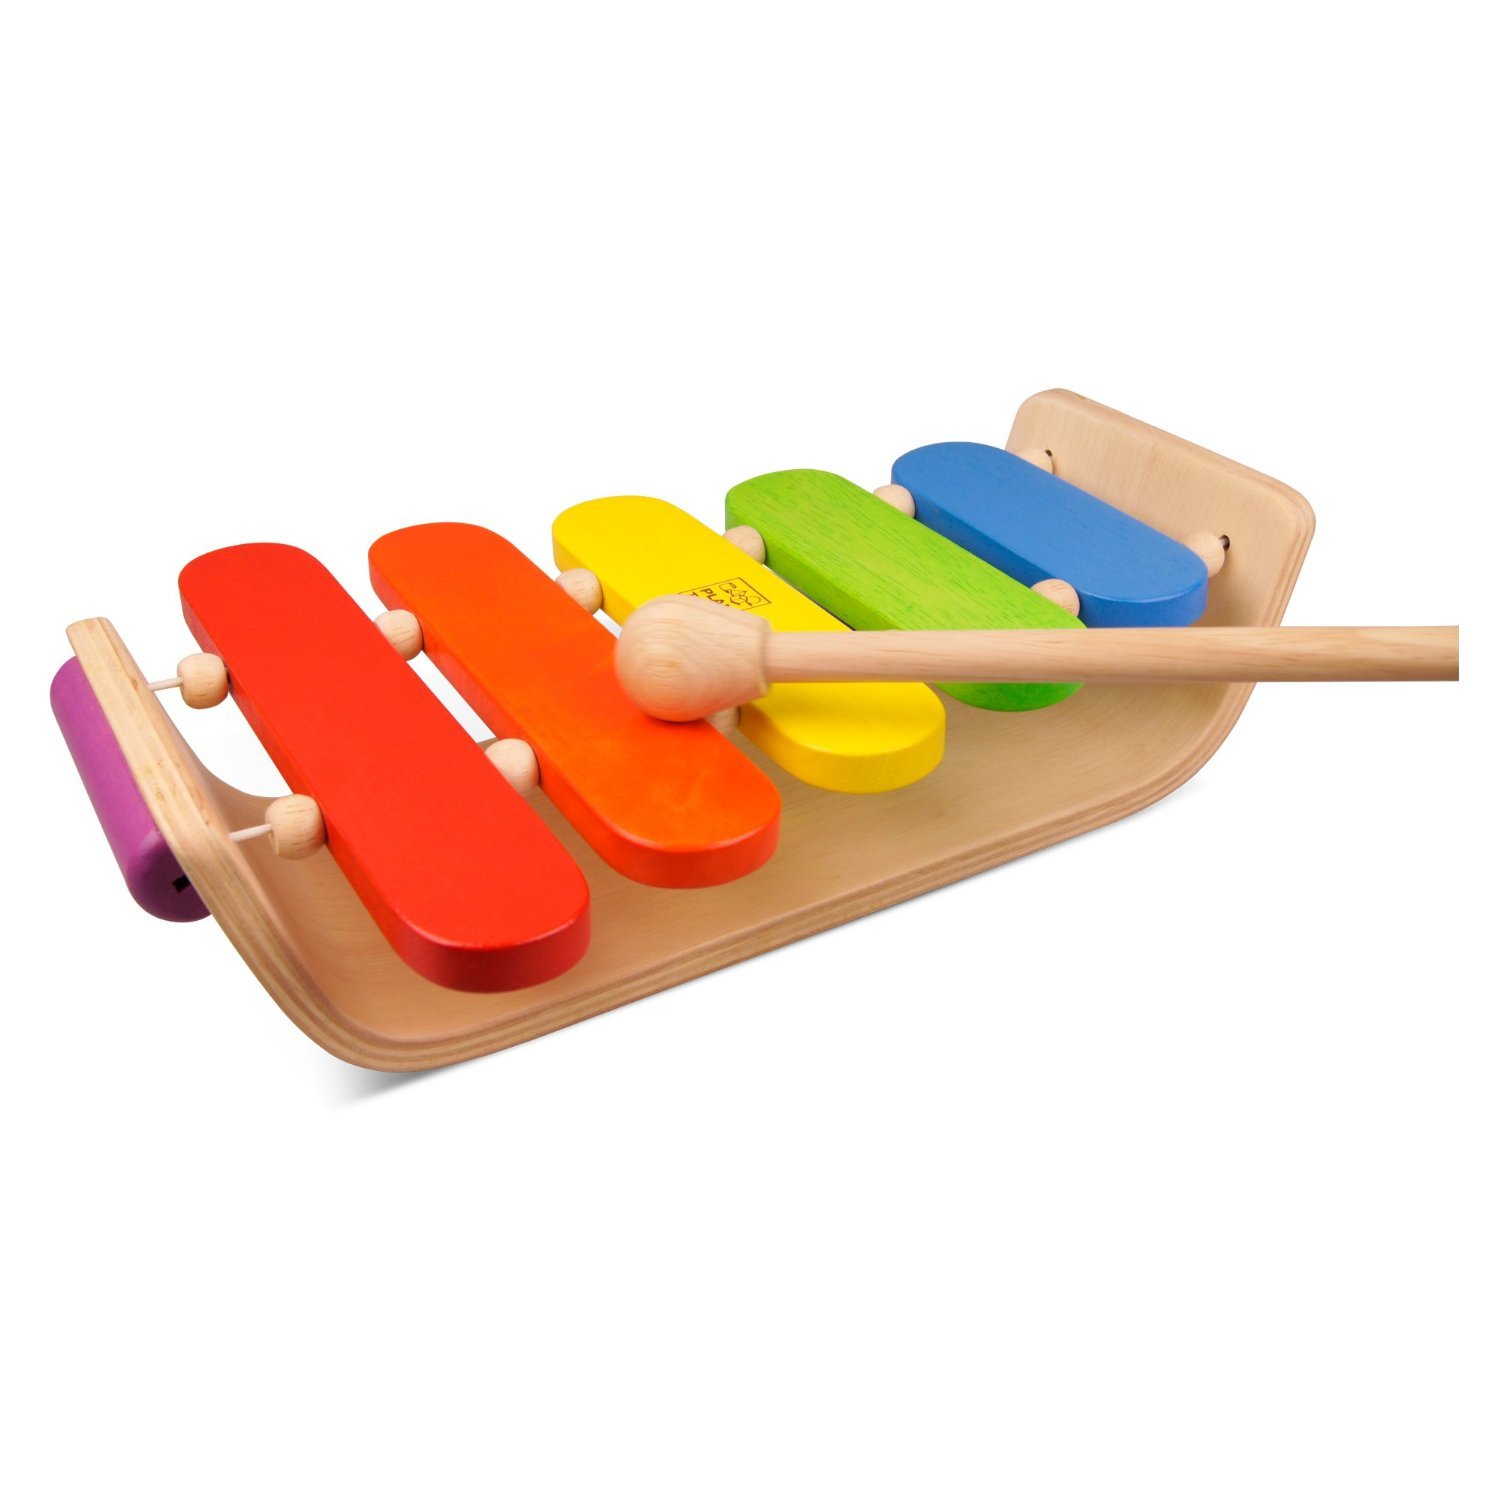 PlanToys Oval Xylophone Wooden Eco ToyPlan Toys Sustainable Wooden 